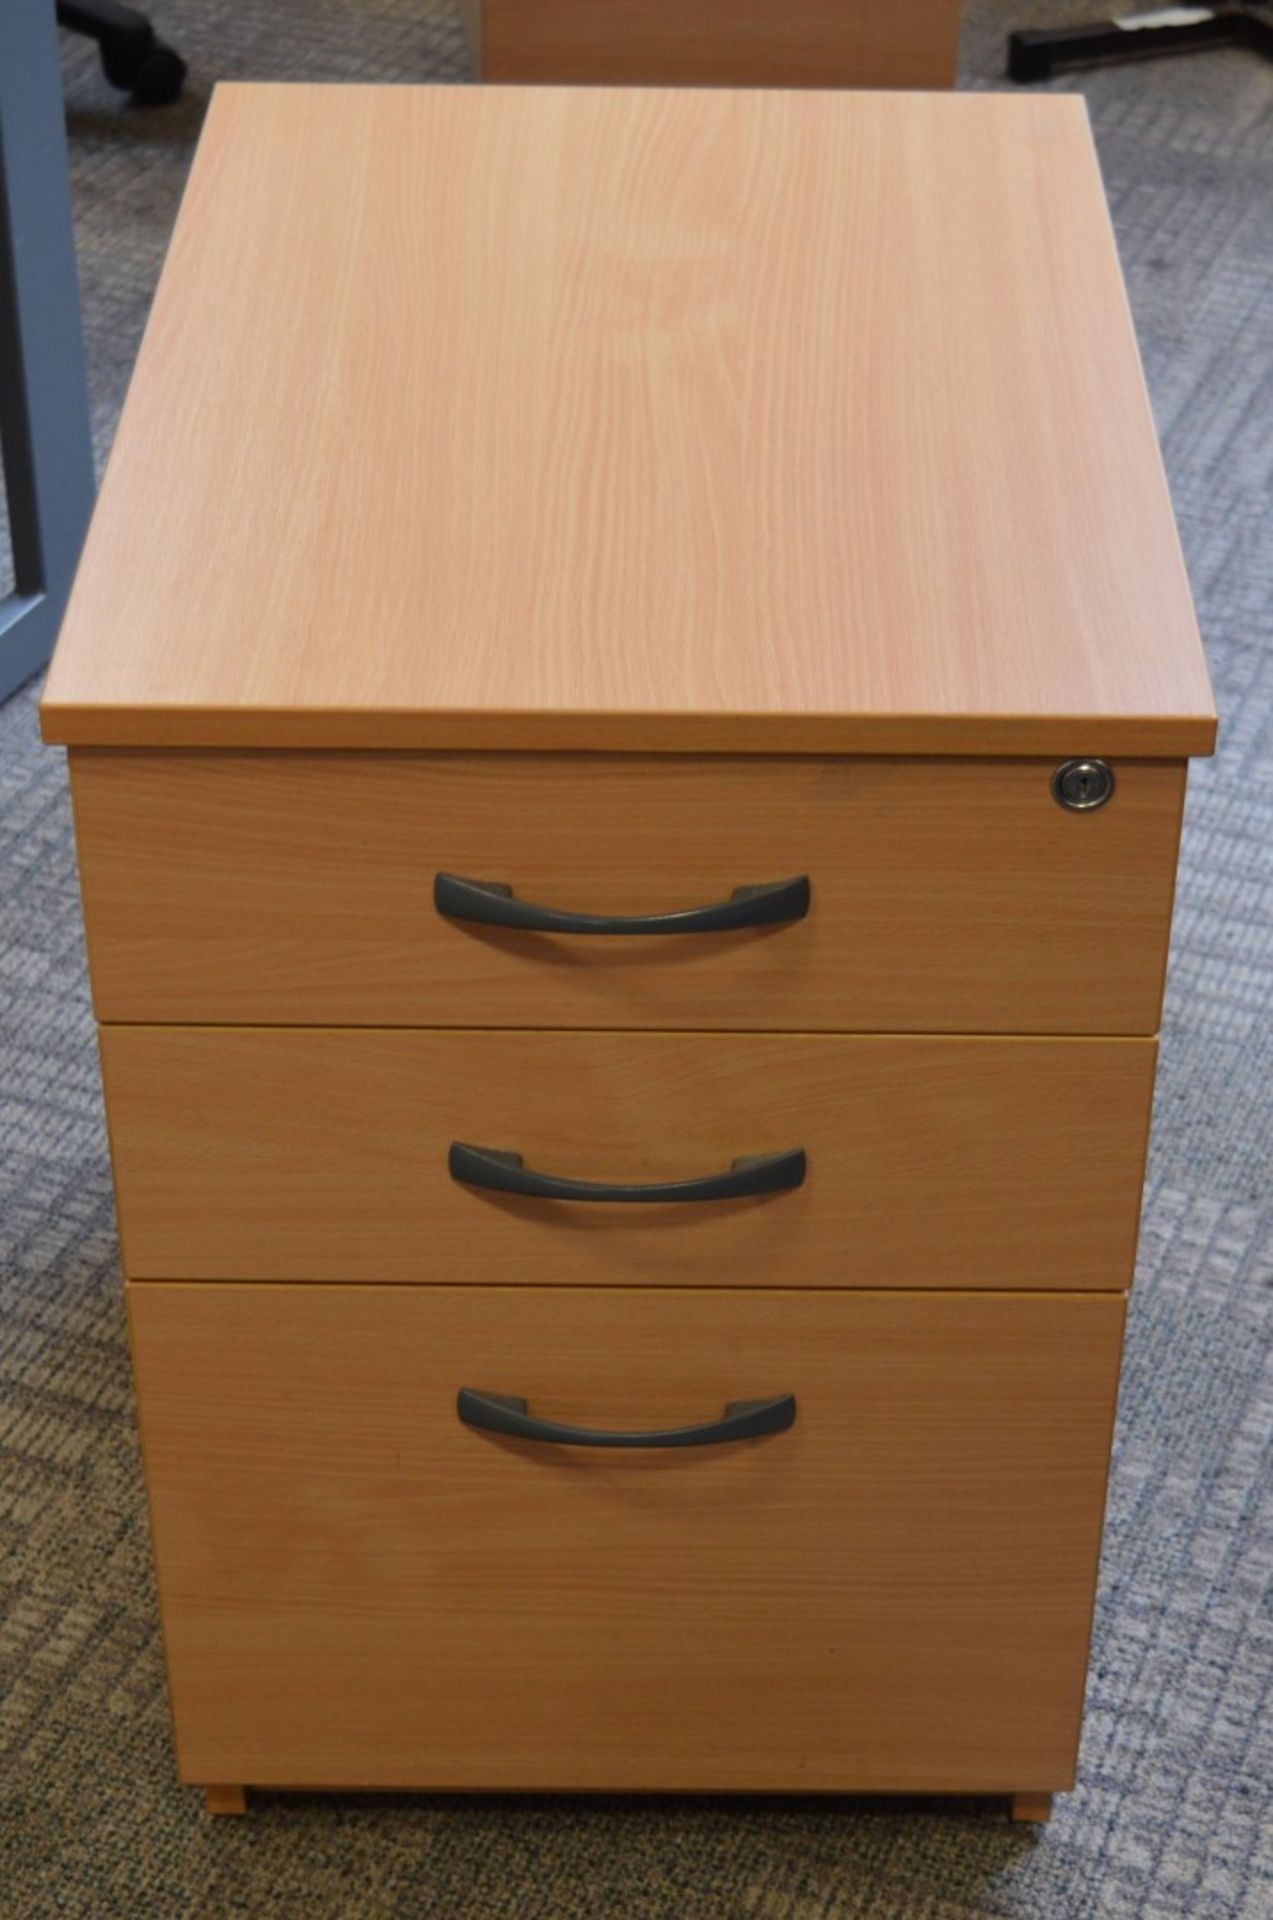 1 x Three Drawer Mobile Pedestal Drawers - With Key - Modern Beech Finish - Two Storage Drawers - Image 2 of 7